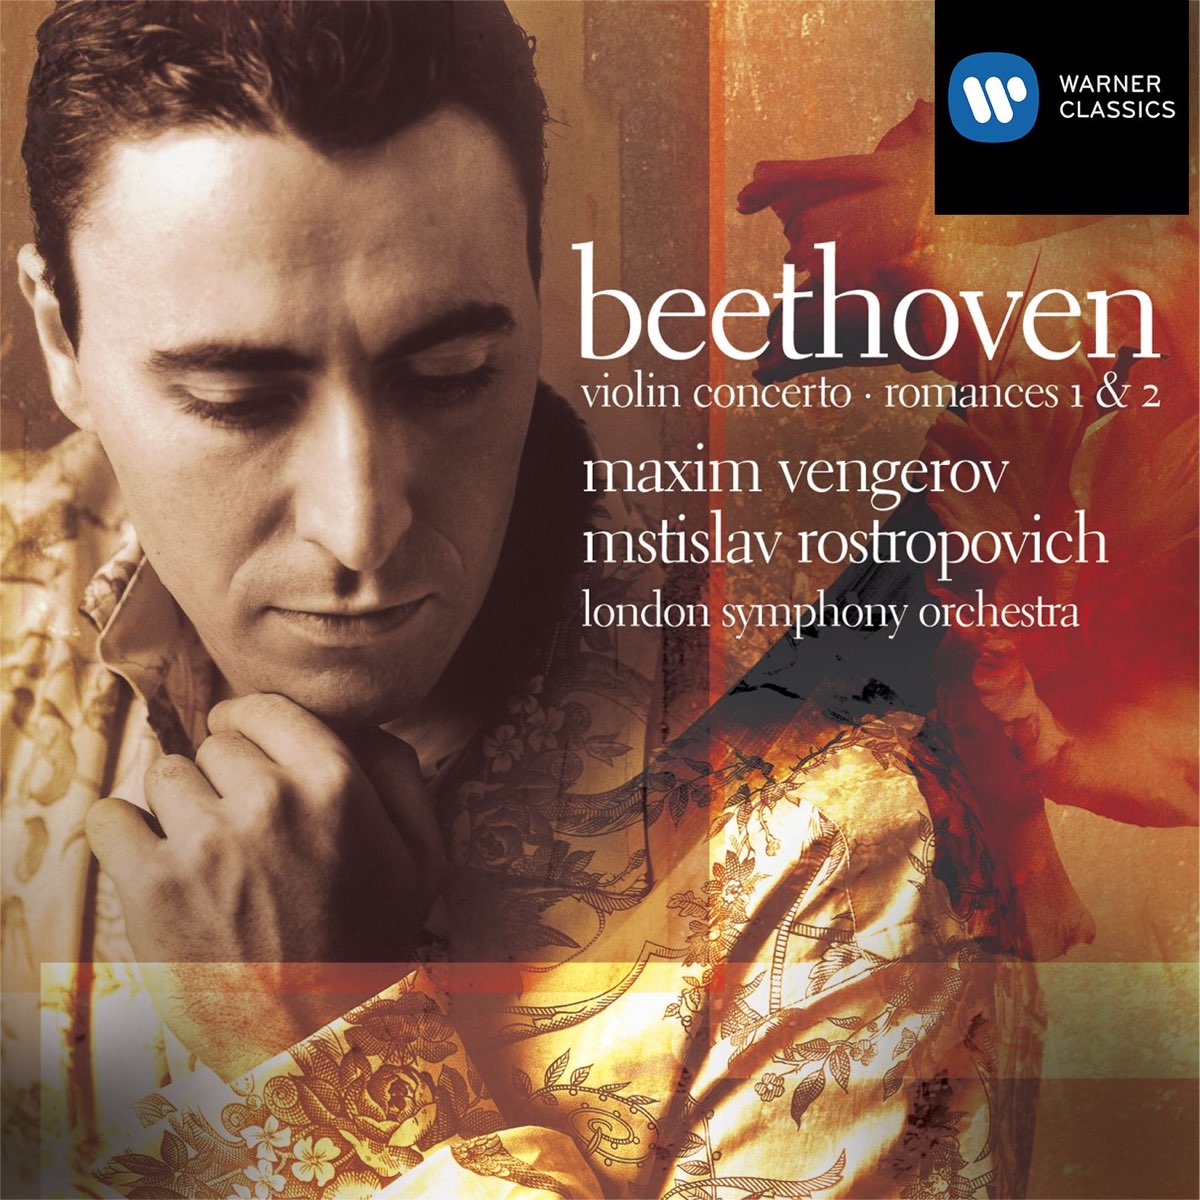 ‎beethoven Violin Concerto Op 61 And Romances Nos 1 2 By Mstislav Rostropovich London